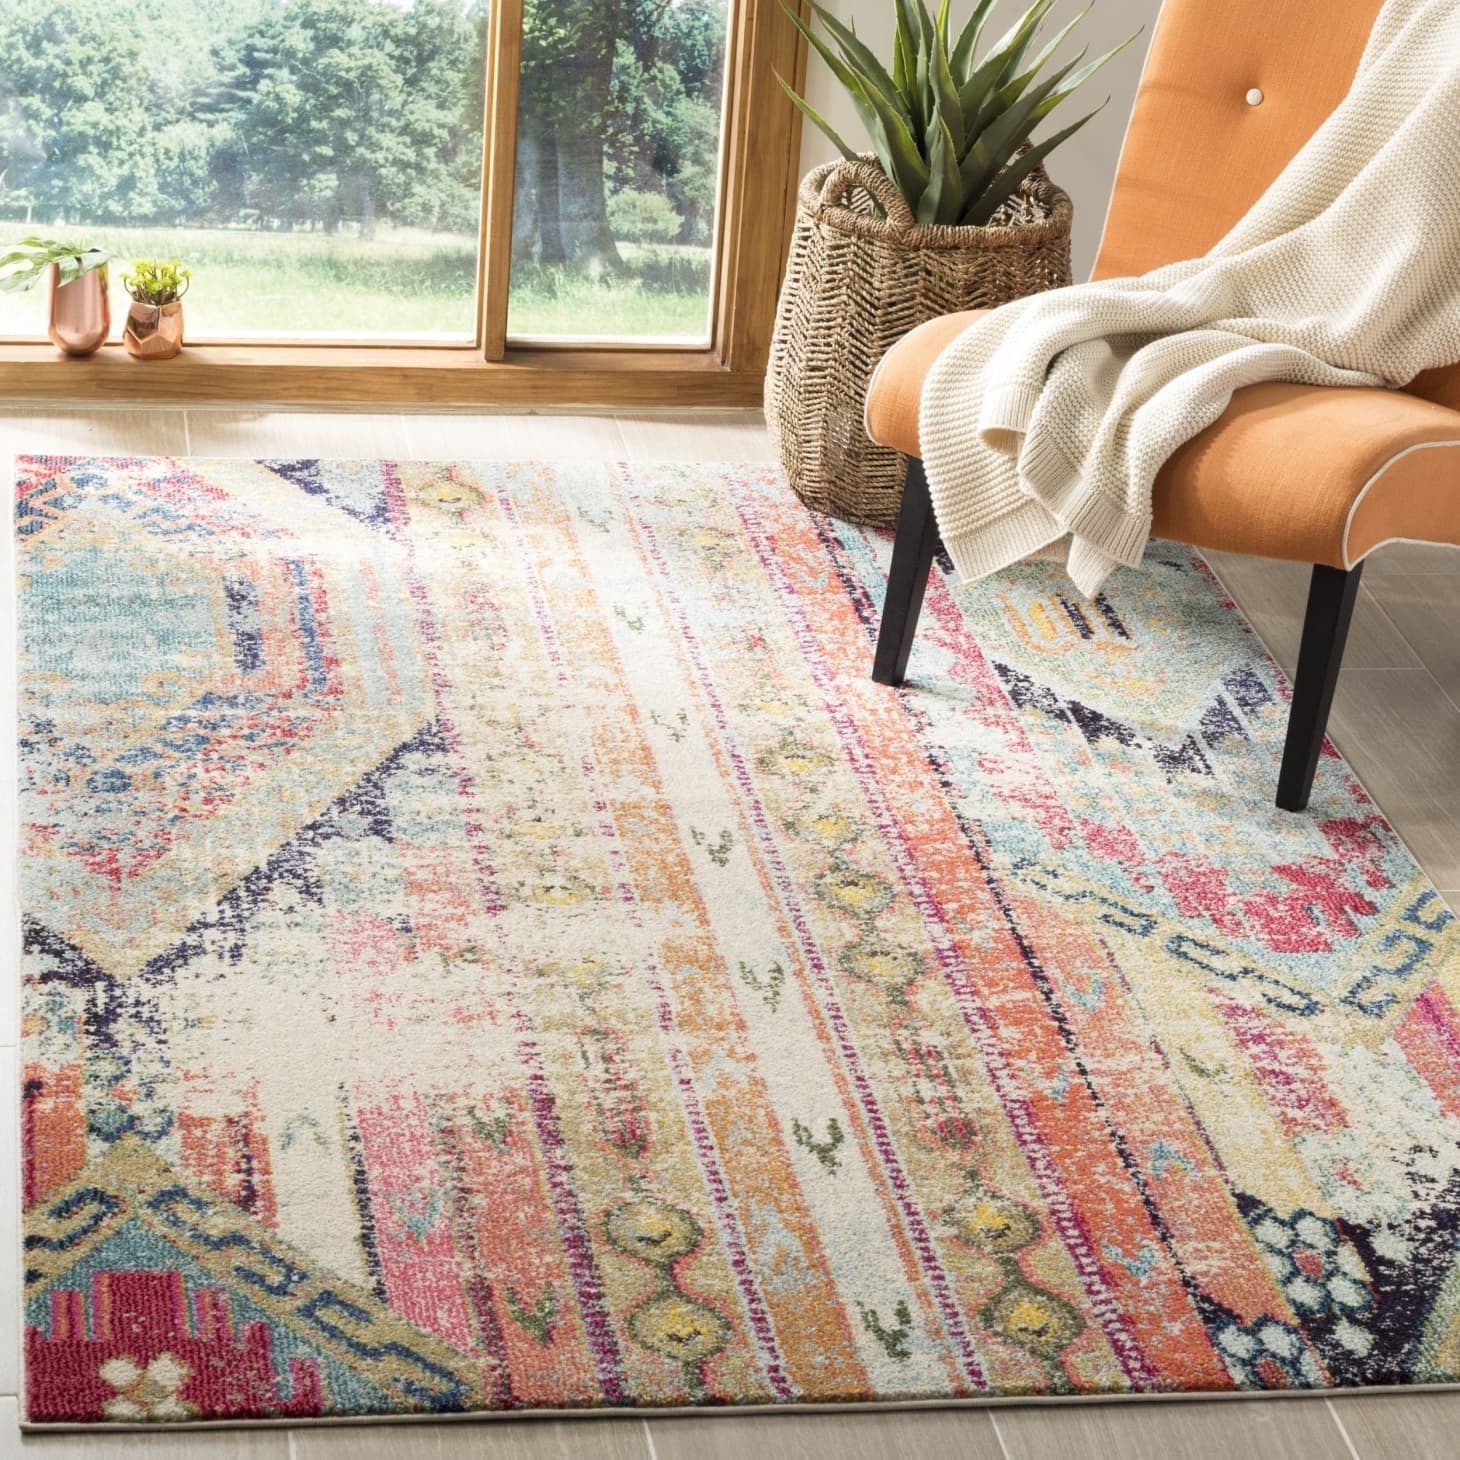 Style on a Budget: 10 Sources for Good, Cheap Rugs | Apartment Therapy